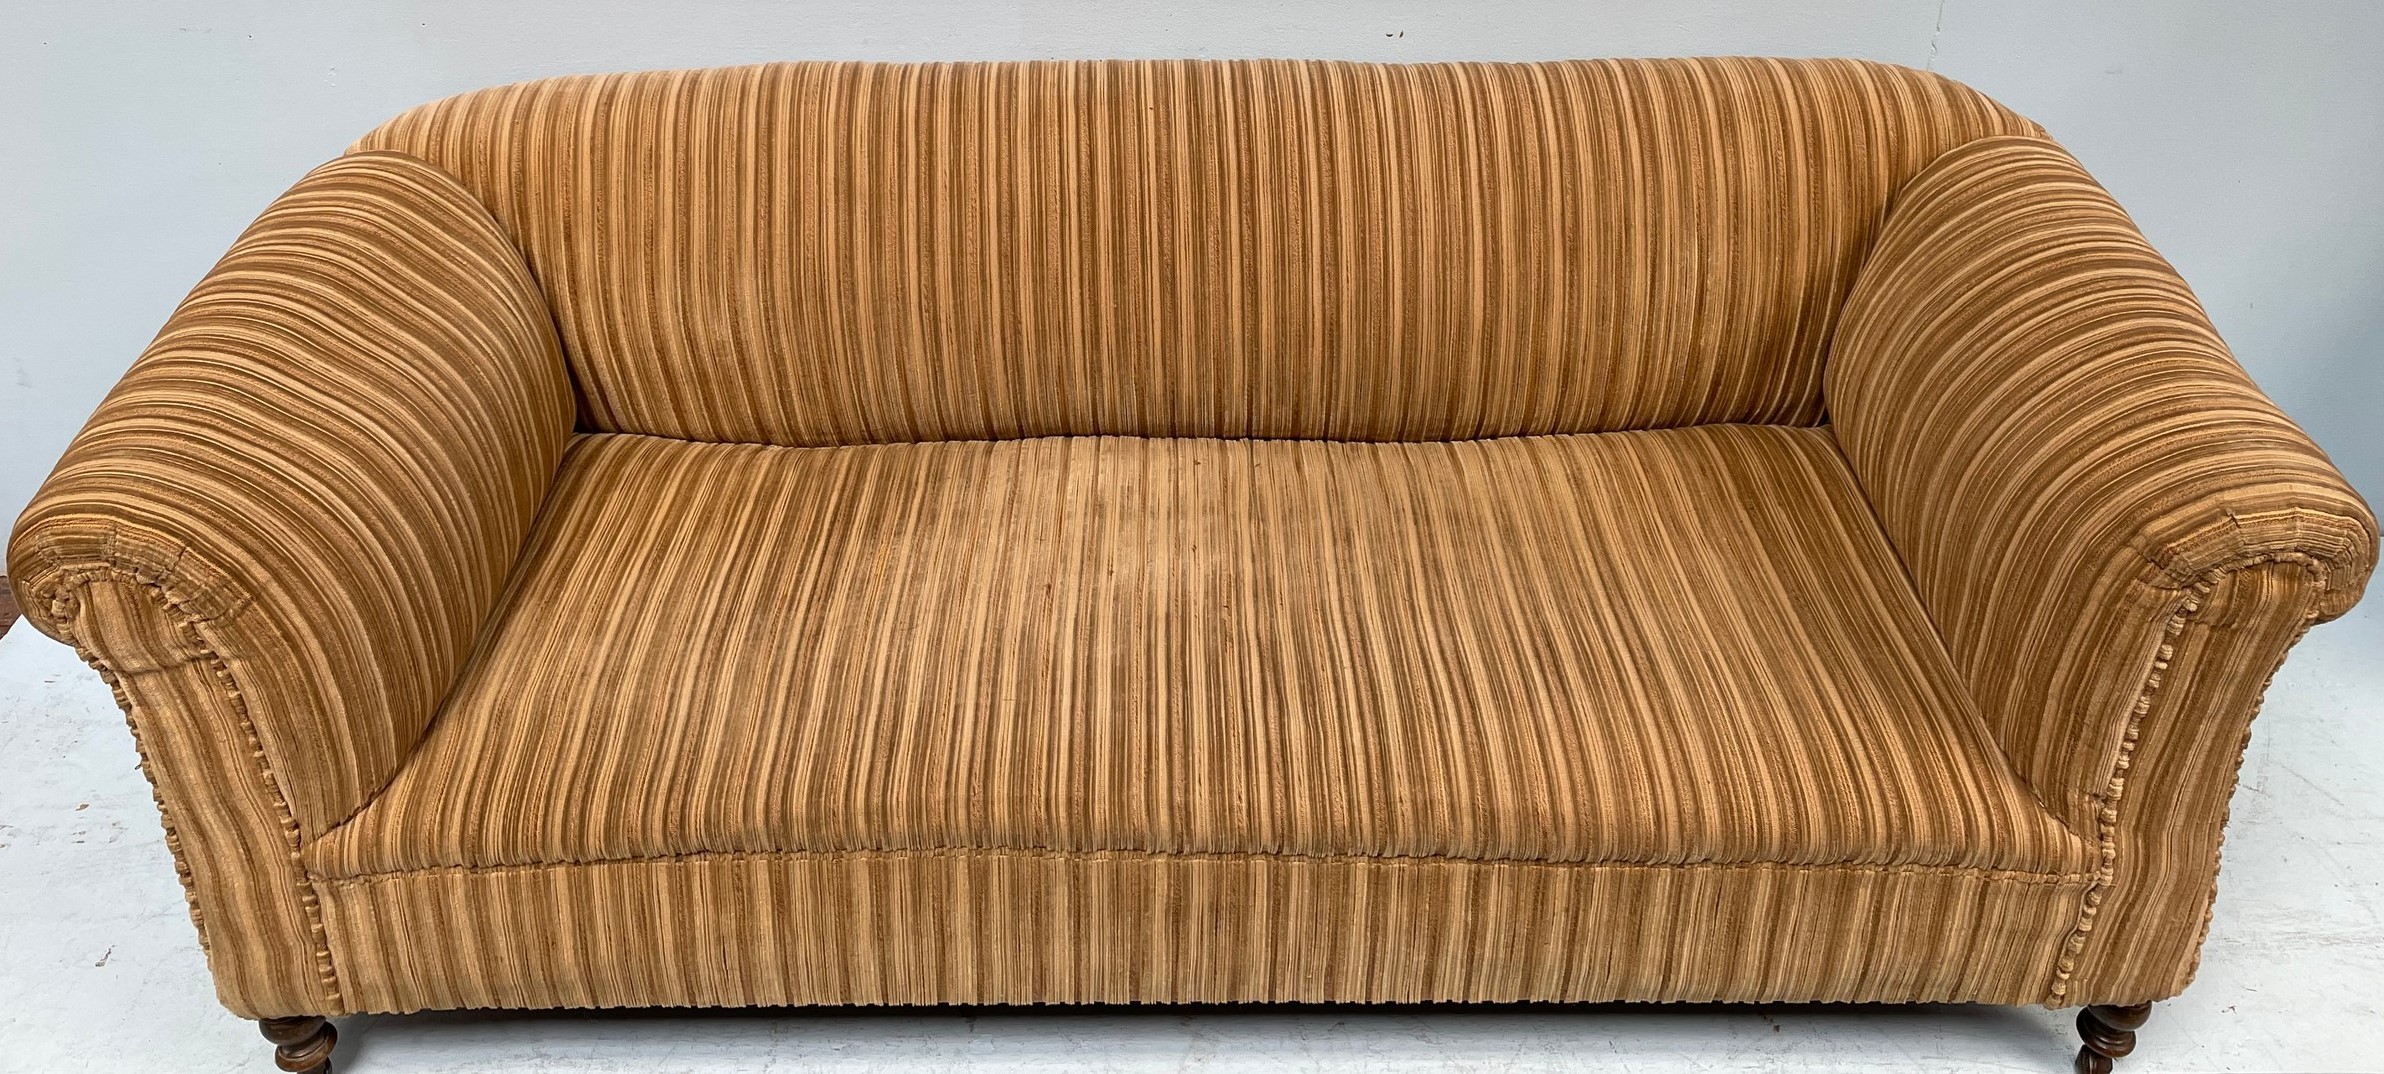 A Chesterfield style sofa with stripy beige and brown upholstery, 190cm wide